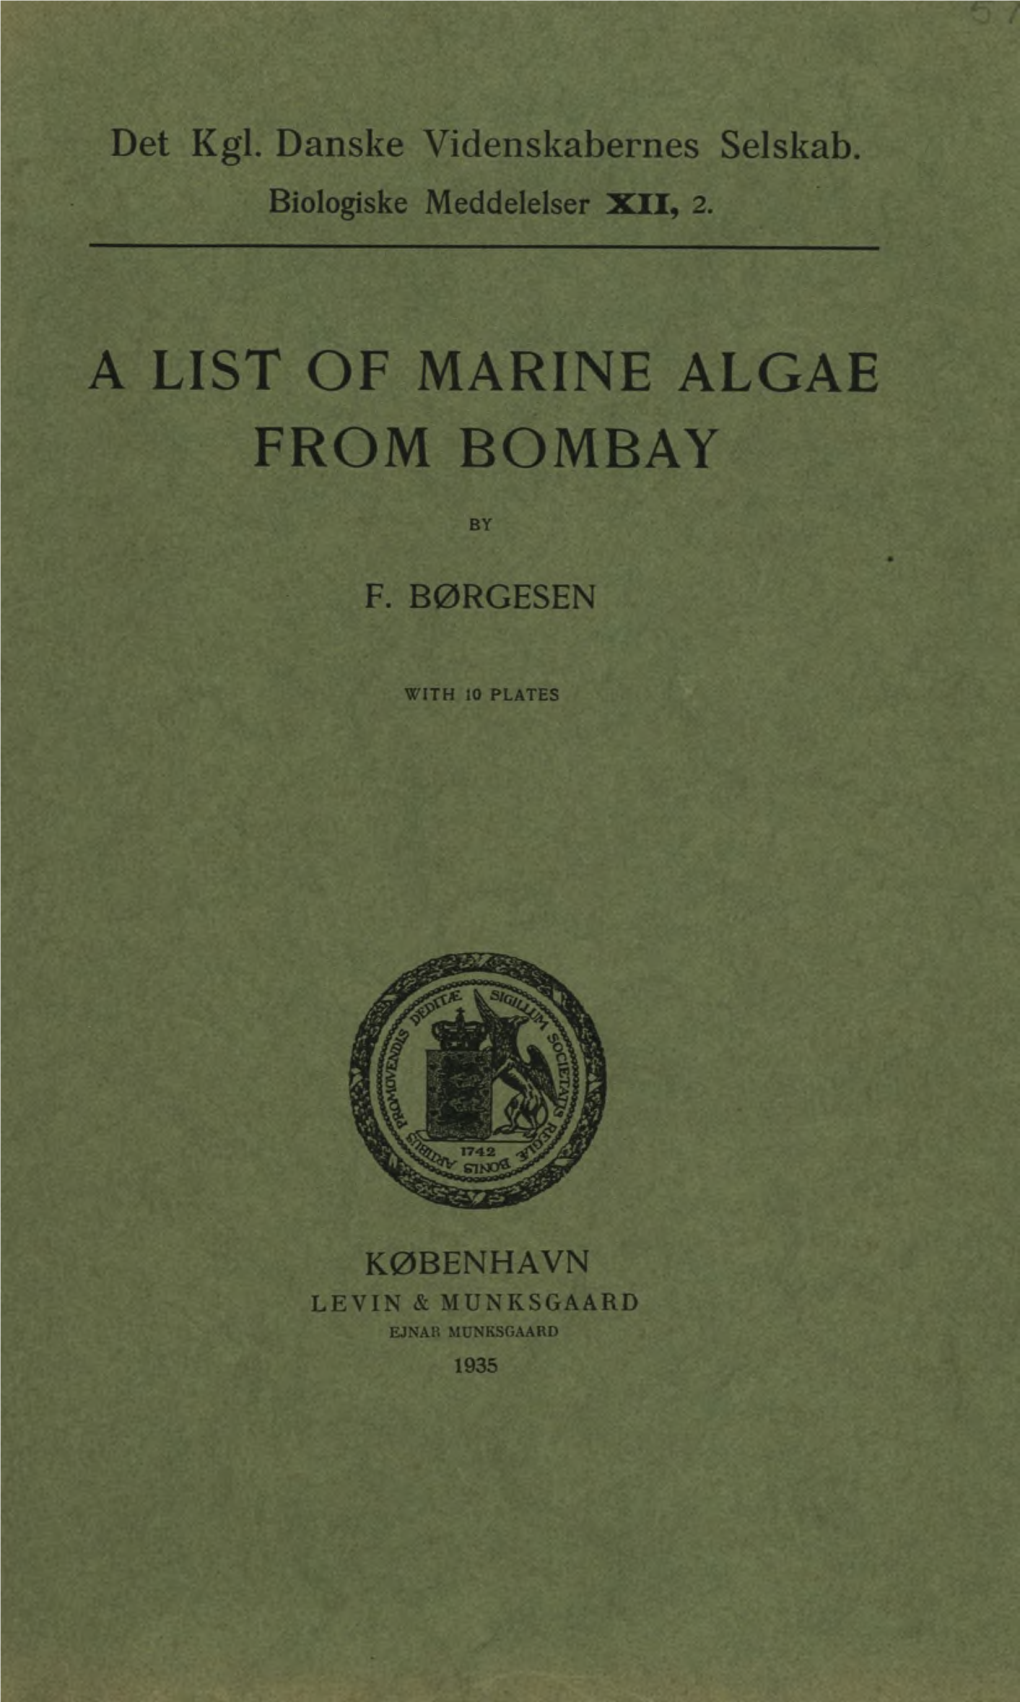 A List of Marine Algae from Bombay by F